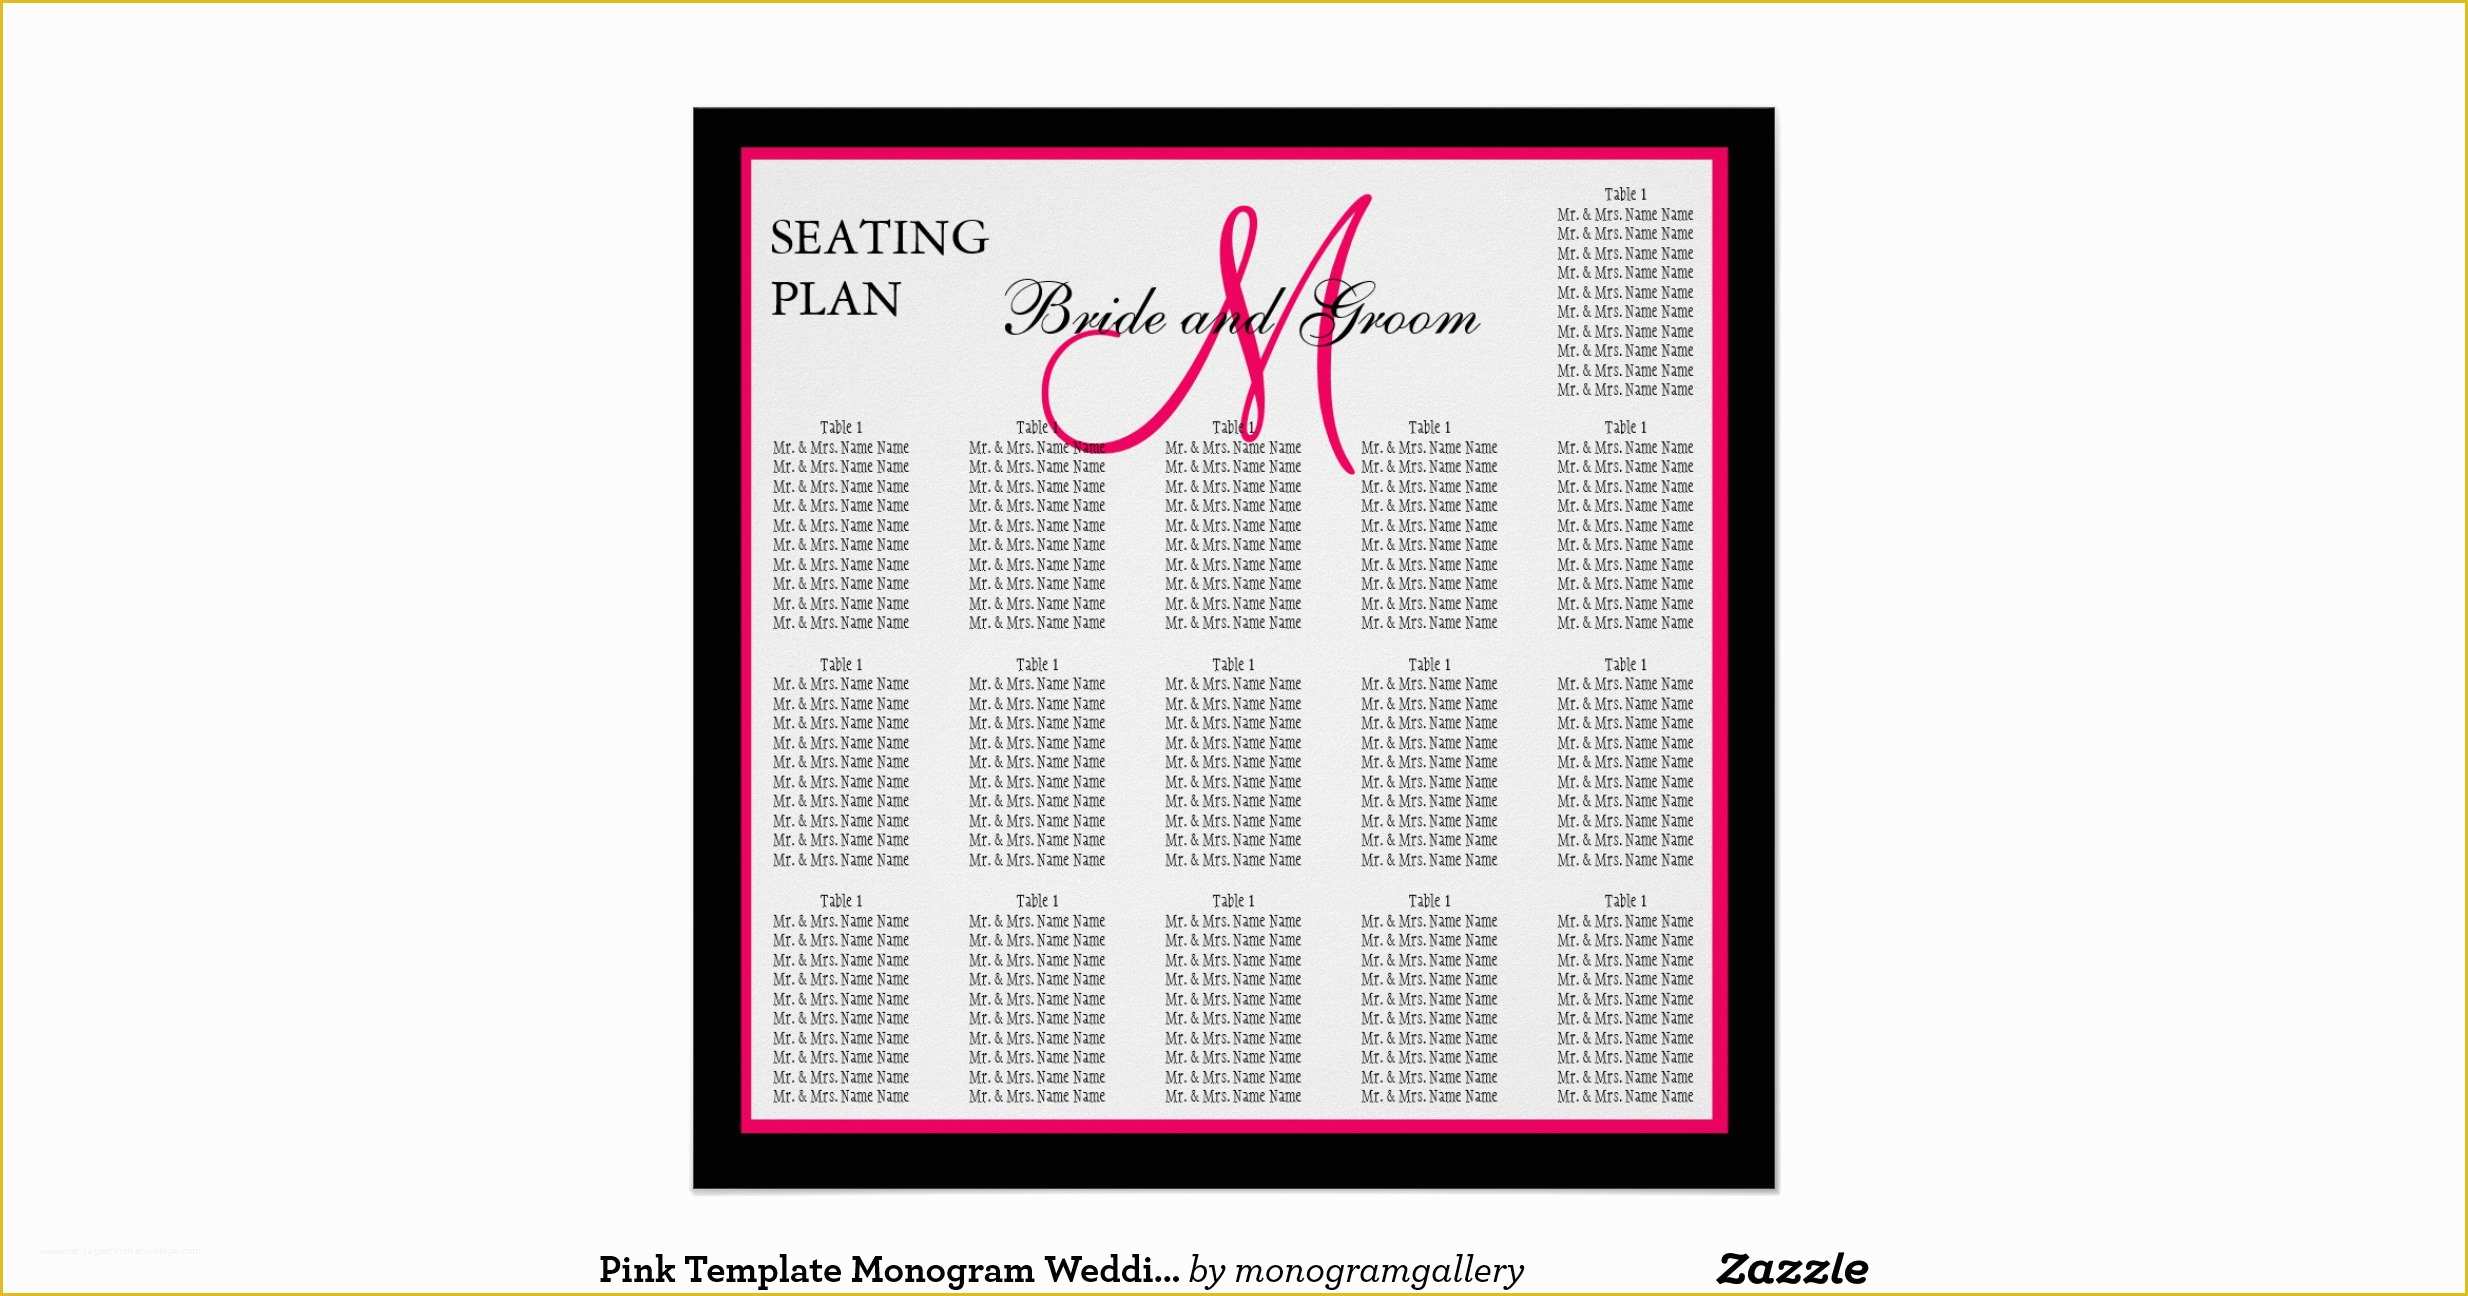 Wedding Seating Chart Poster Template Free Of Pink Template Monogram Wedding Seating Chart Poster